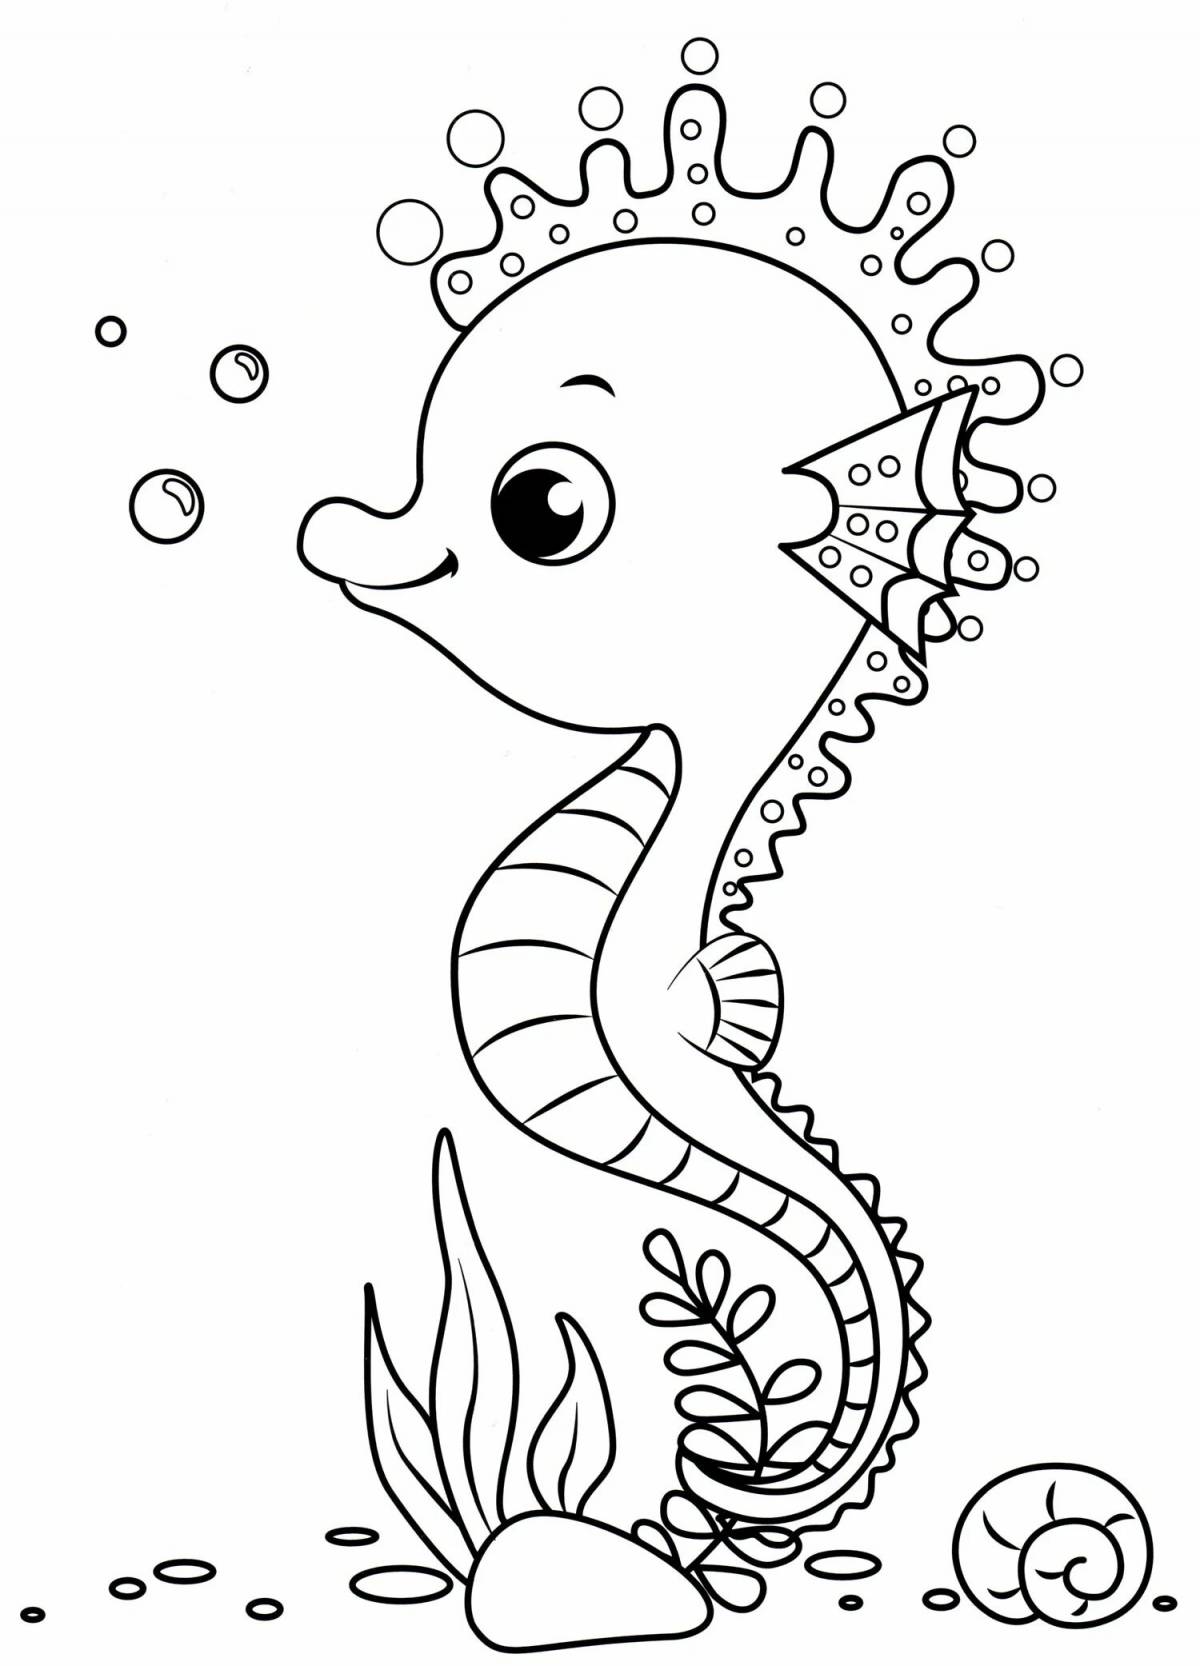 Glowing seahorse coloring page for kids